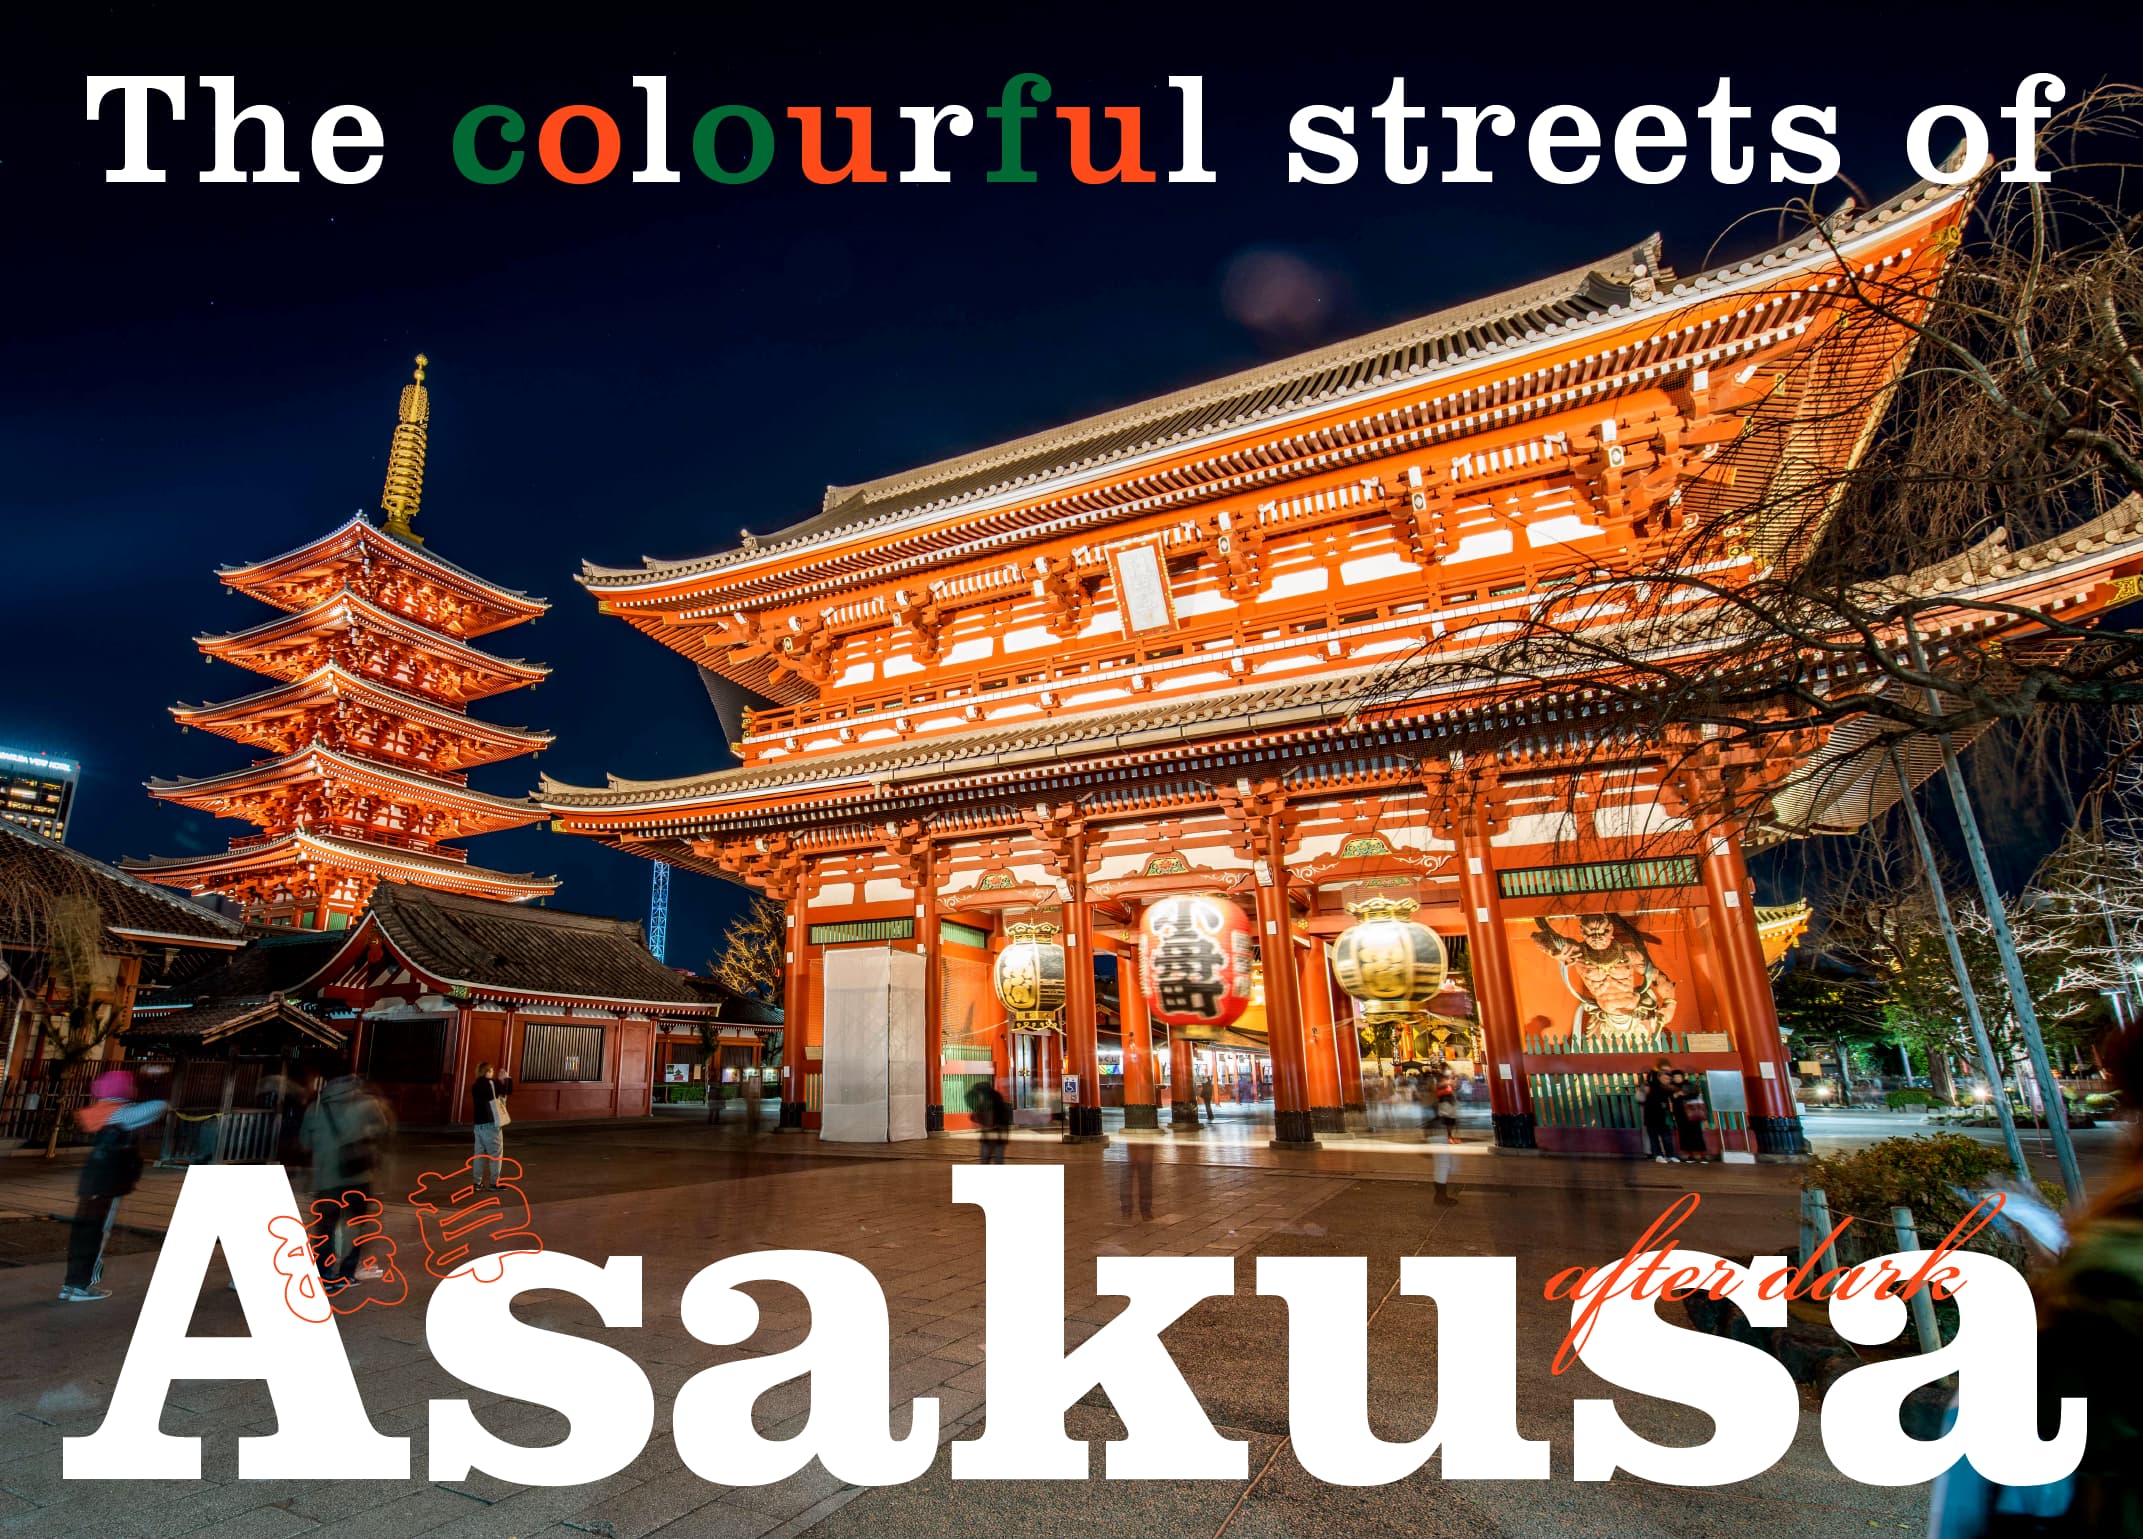 The colourful streets of Asakusa after dark